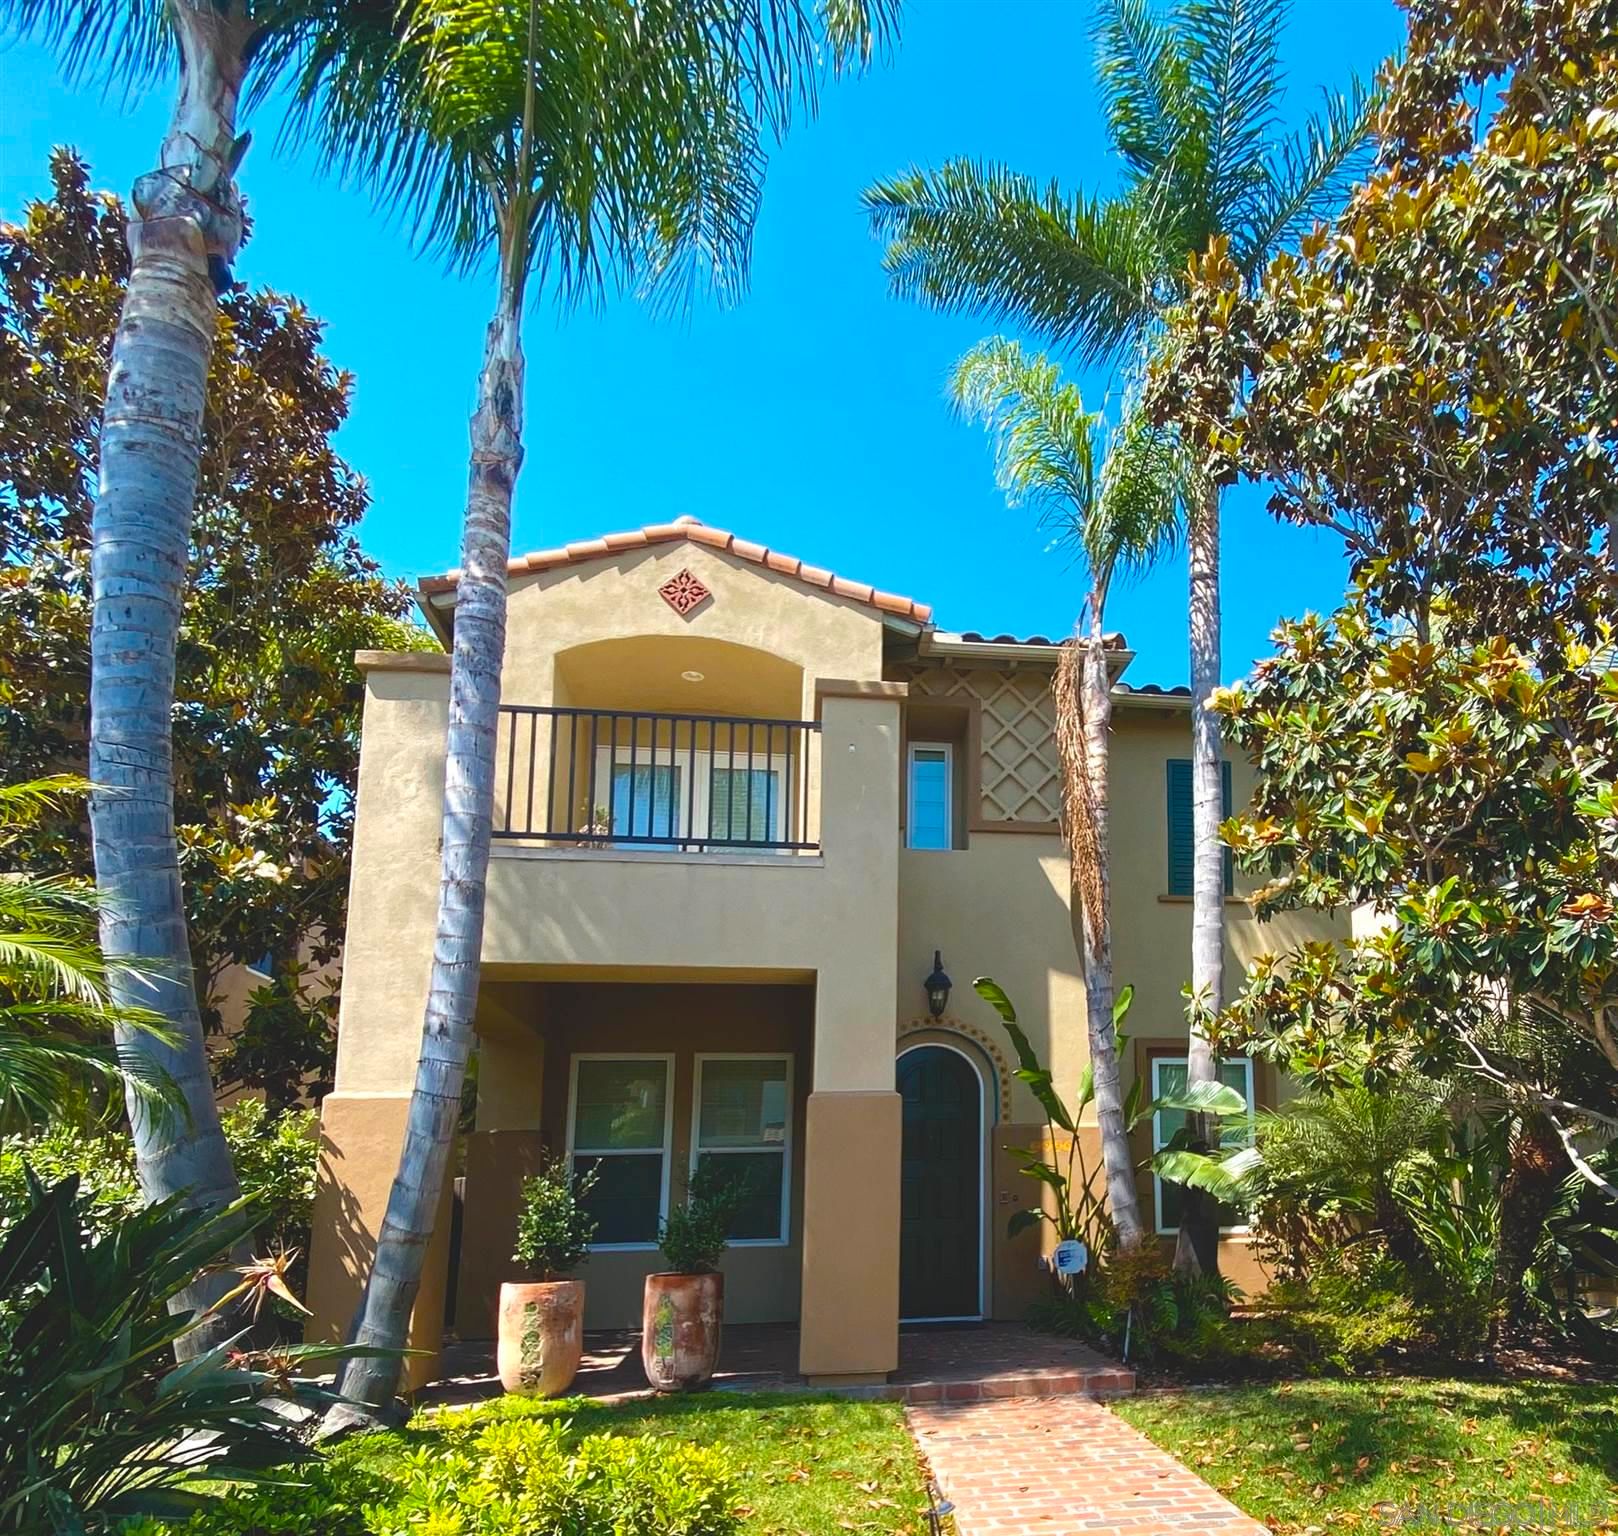 I have sold a property at 2939 Bainbridge Rd W in San Diego
